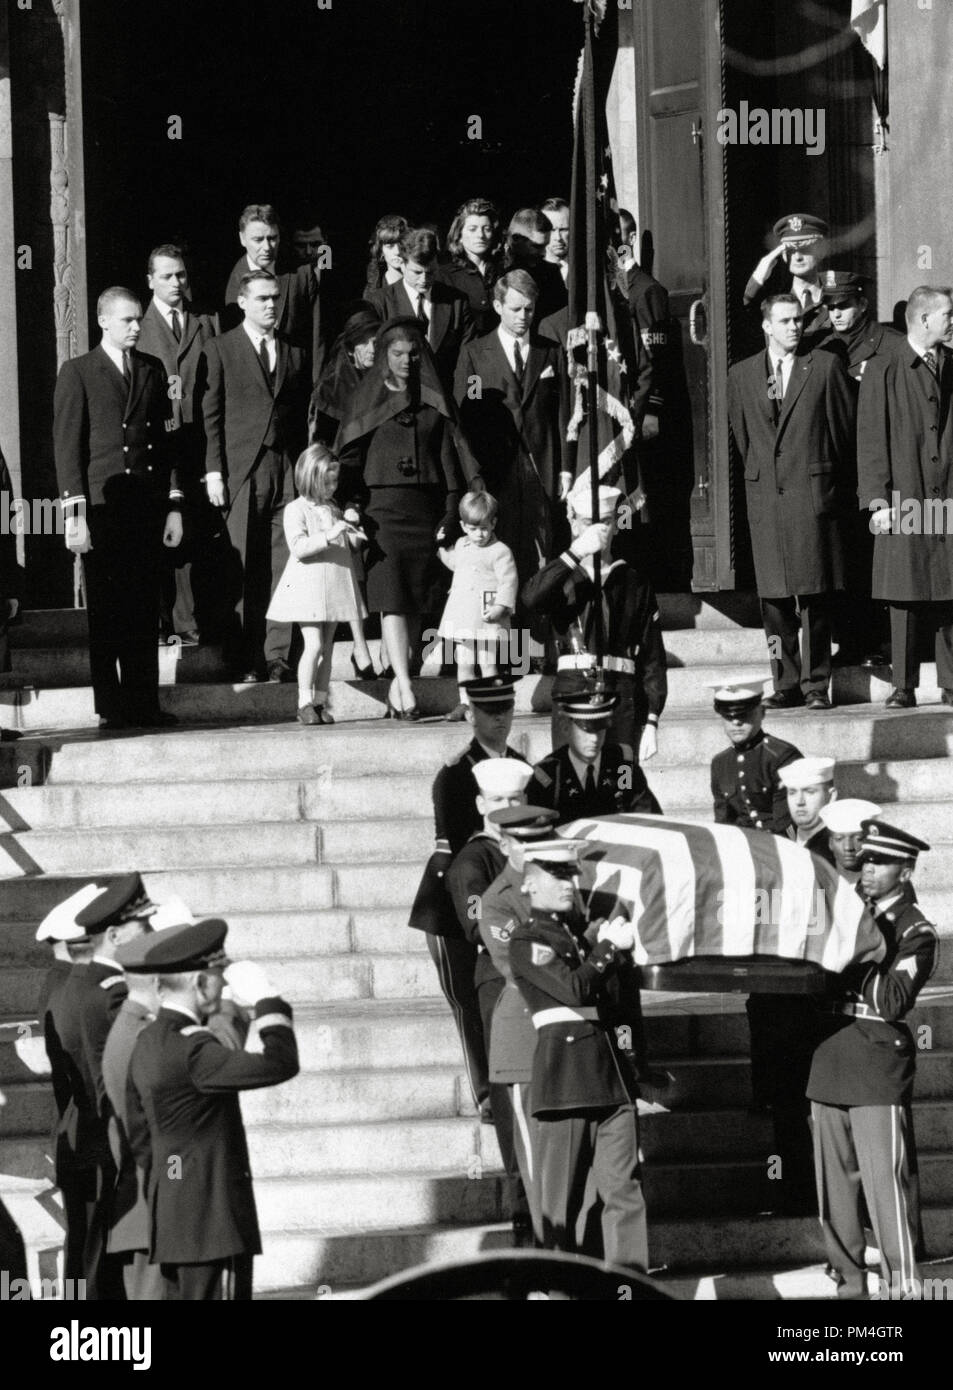 The coffin of assassinated American President John F. Kennedy is carried down the steps at St Matthew's Cathedral, Washington, after the requiem mass. Following the coffin is his widow Jacqueline Bouvier Kennedy, their children Caroline and John Jr. and Robert Kennedy. (Photo NARA)   File Reference # 1003 112THA Stock Photo